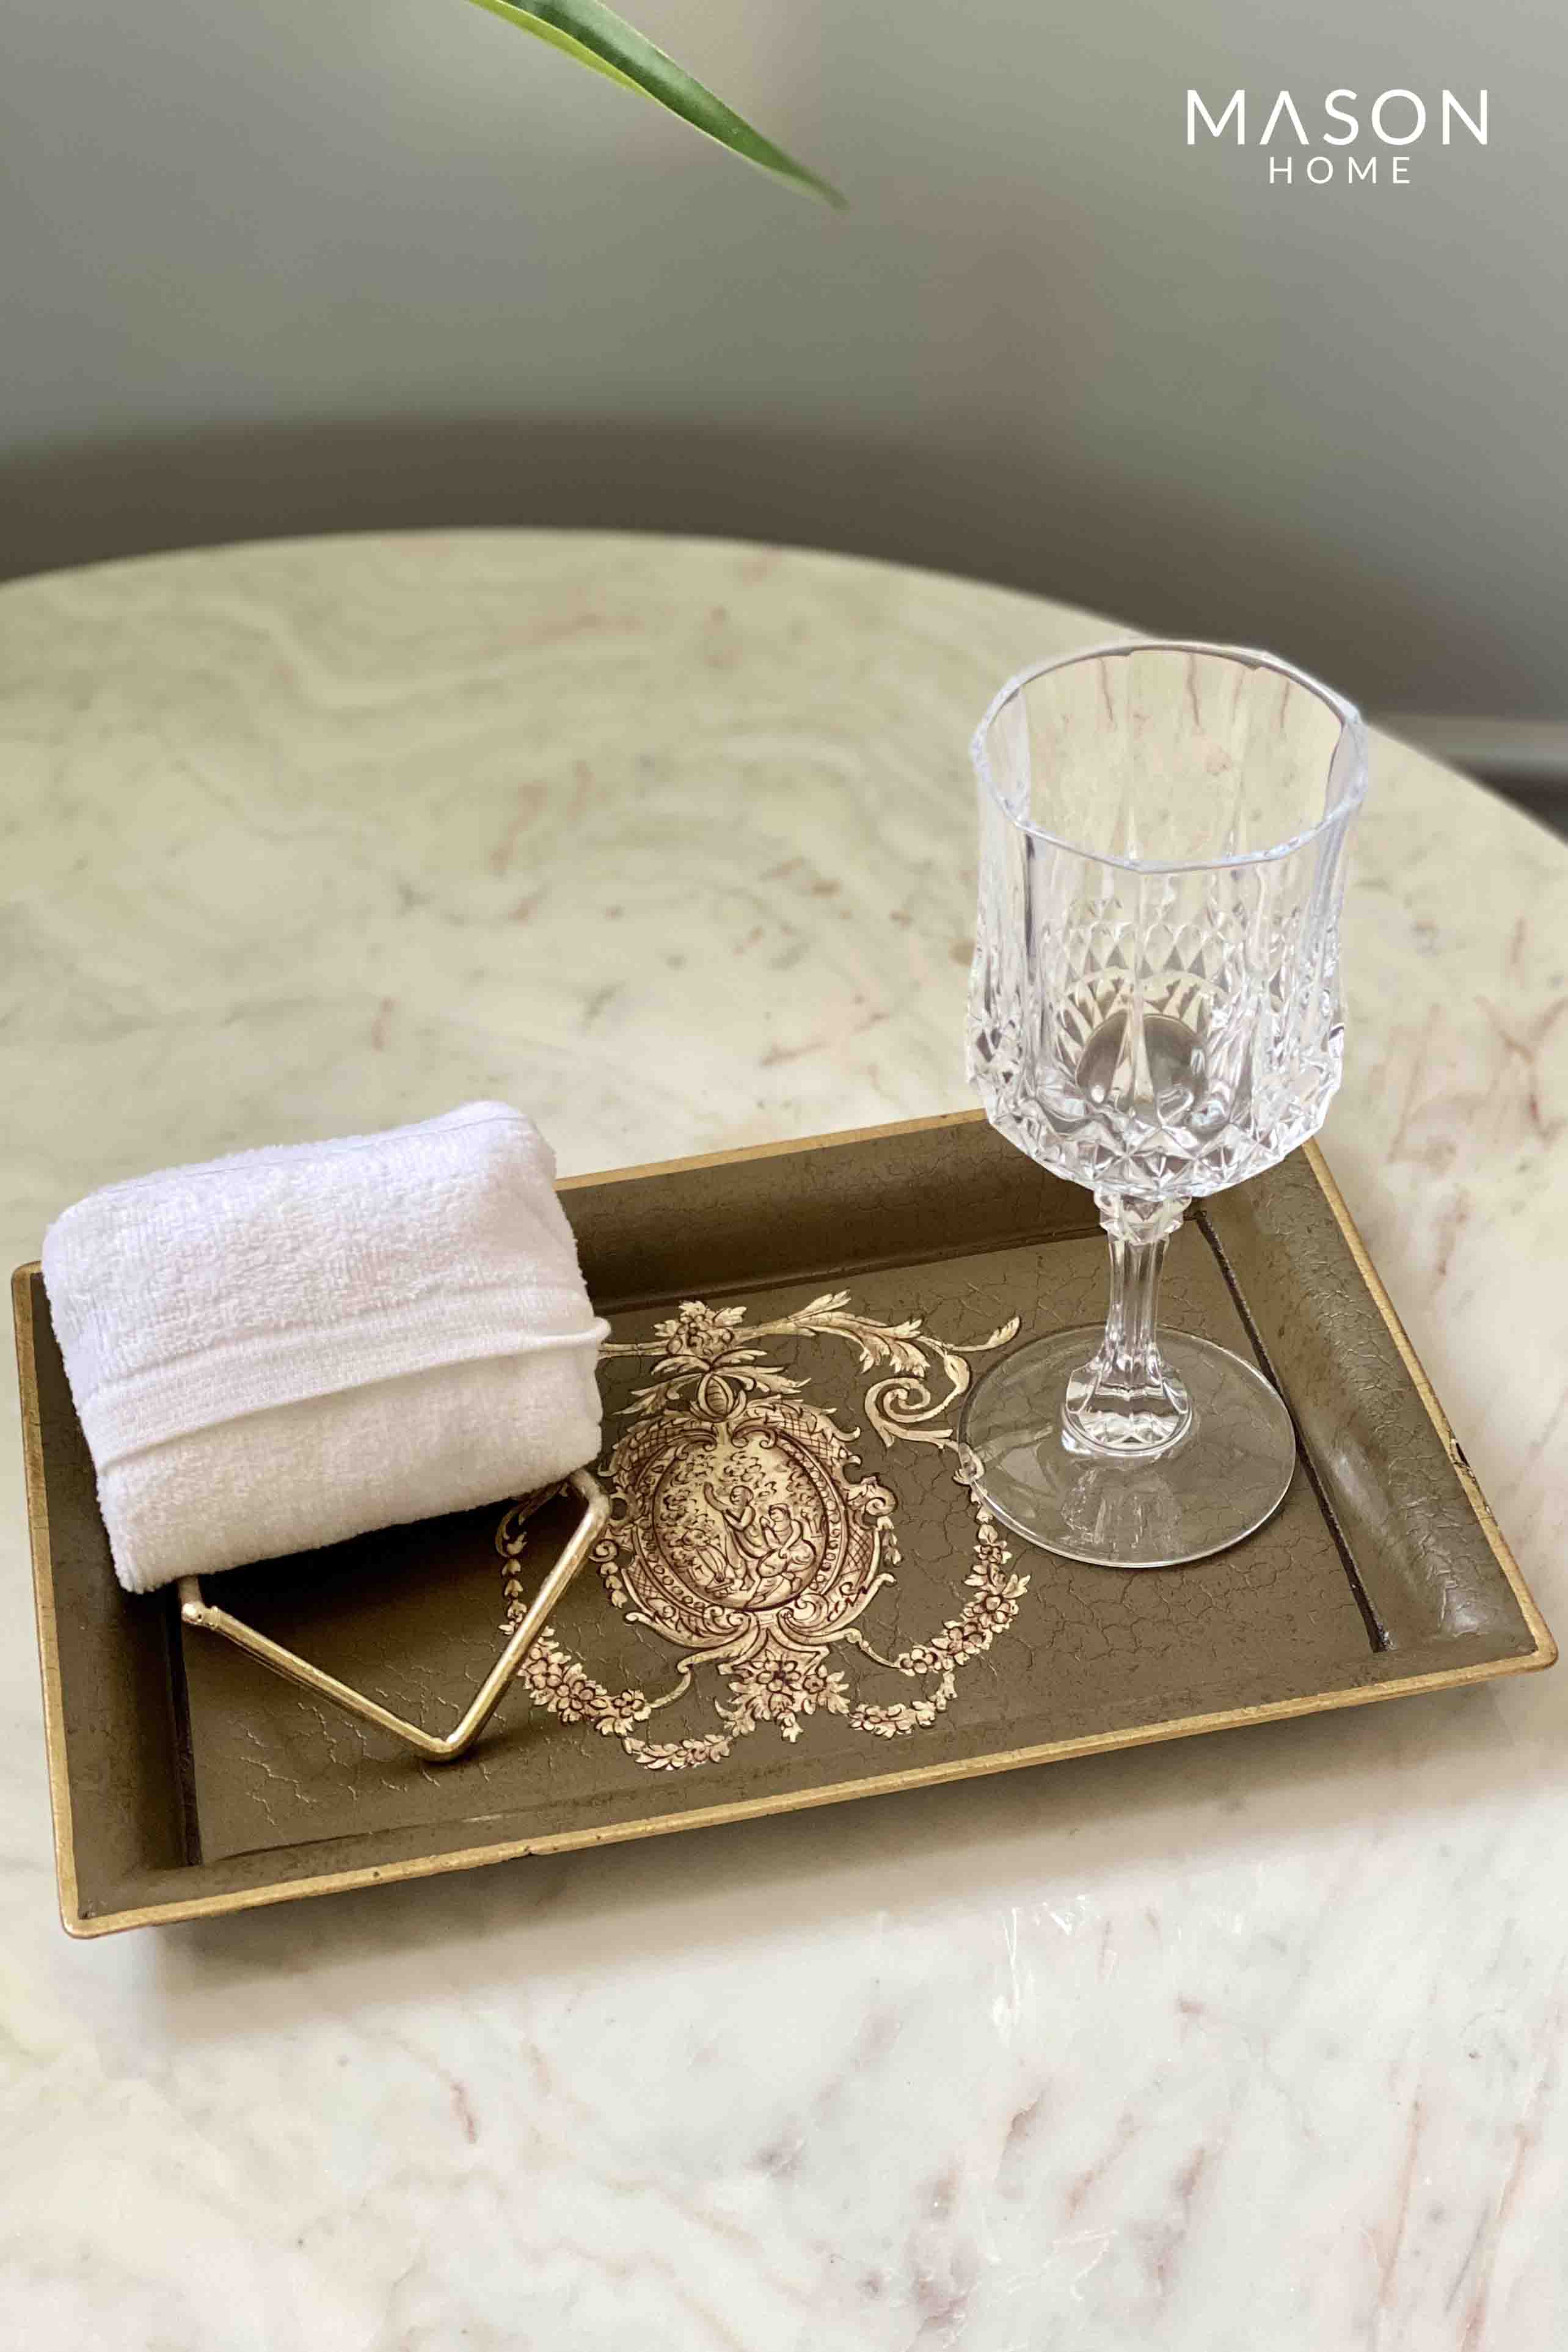 Regal Medallion Hand-Painted Tray